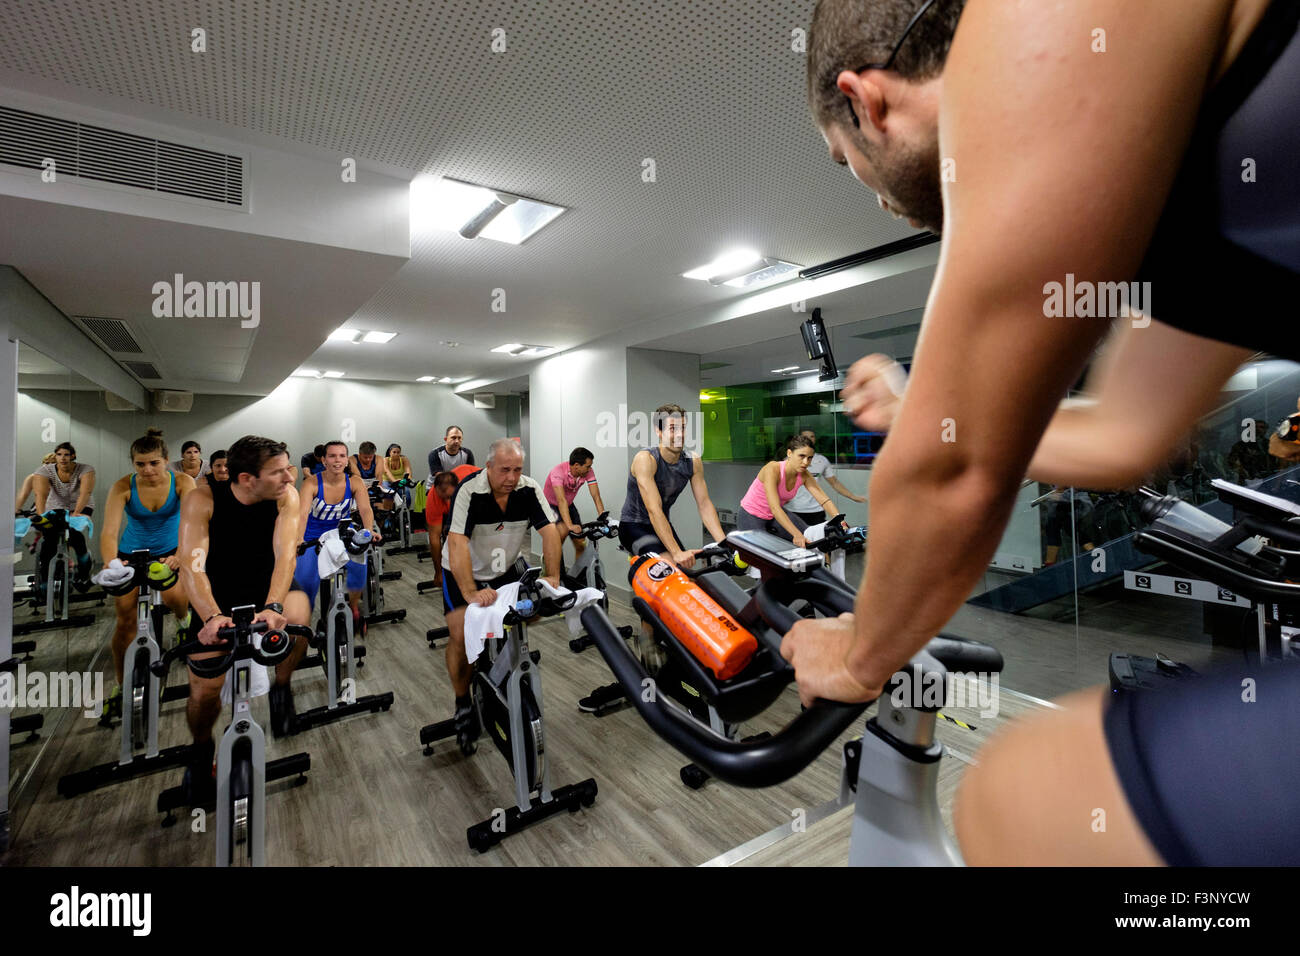 Fitness instructor encourages people riding stationary bicycles during a spinning class at the gym Stock Photo